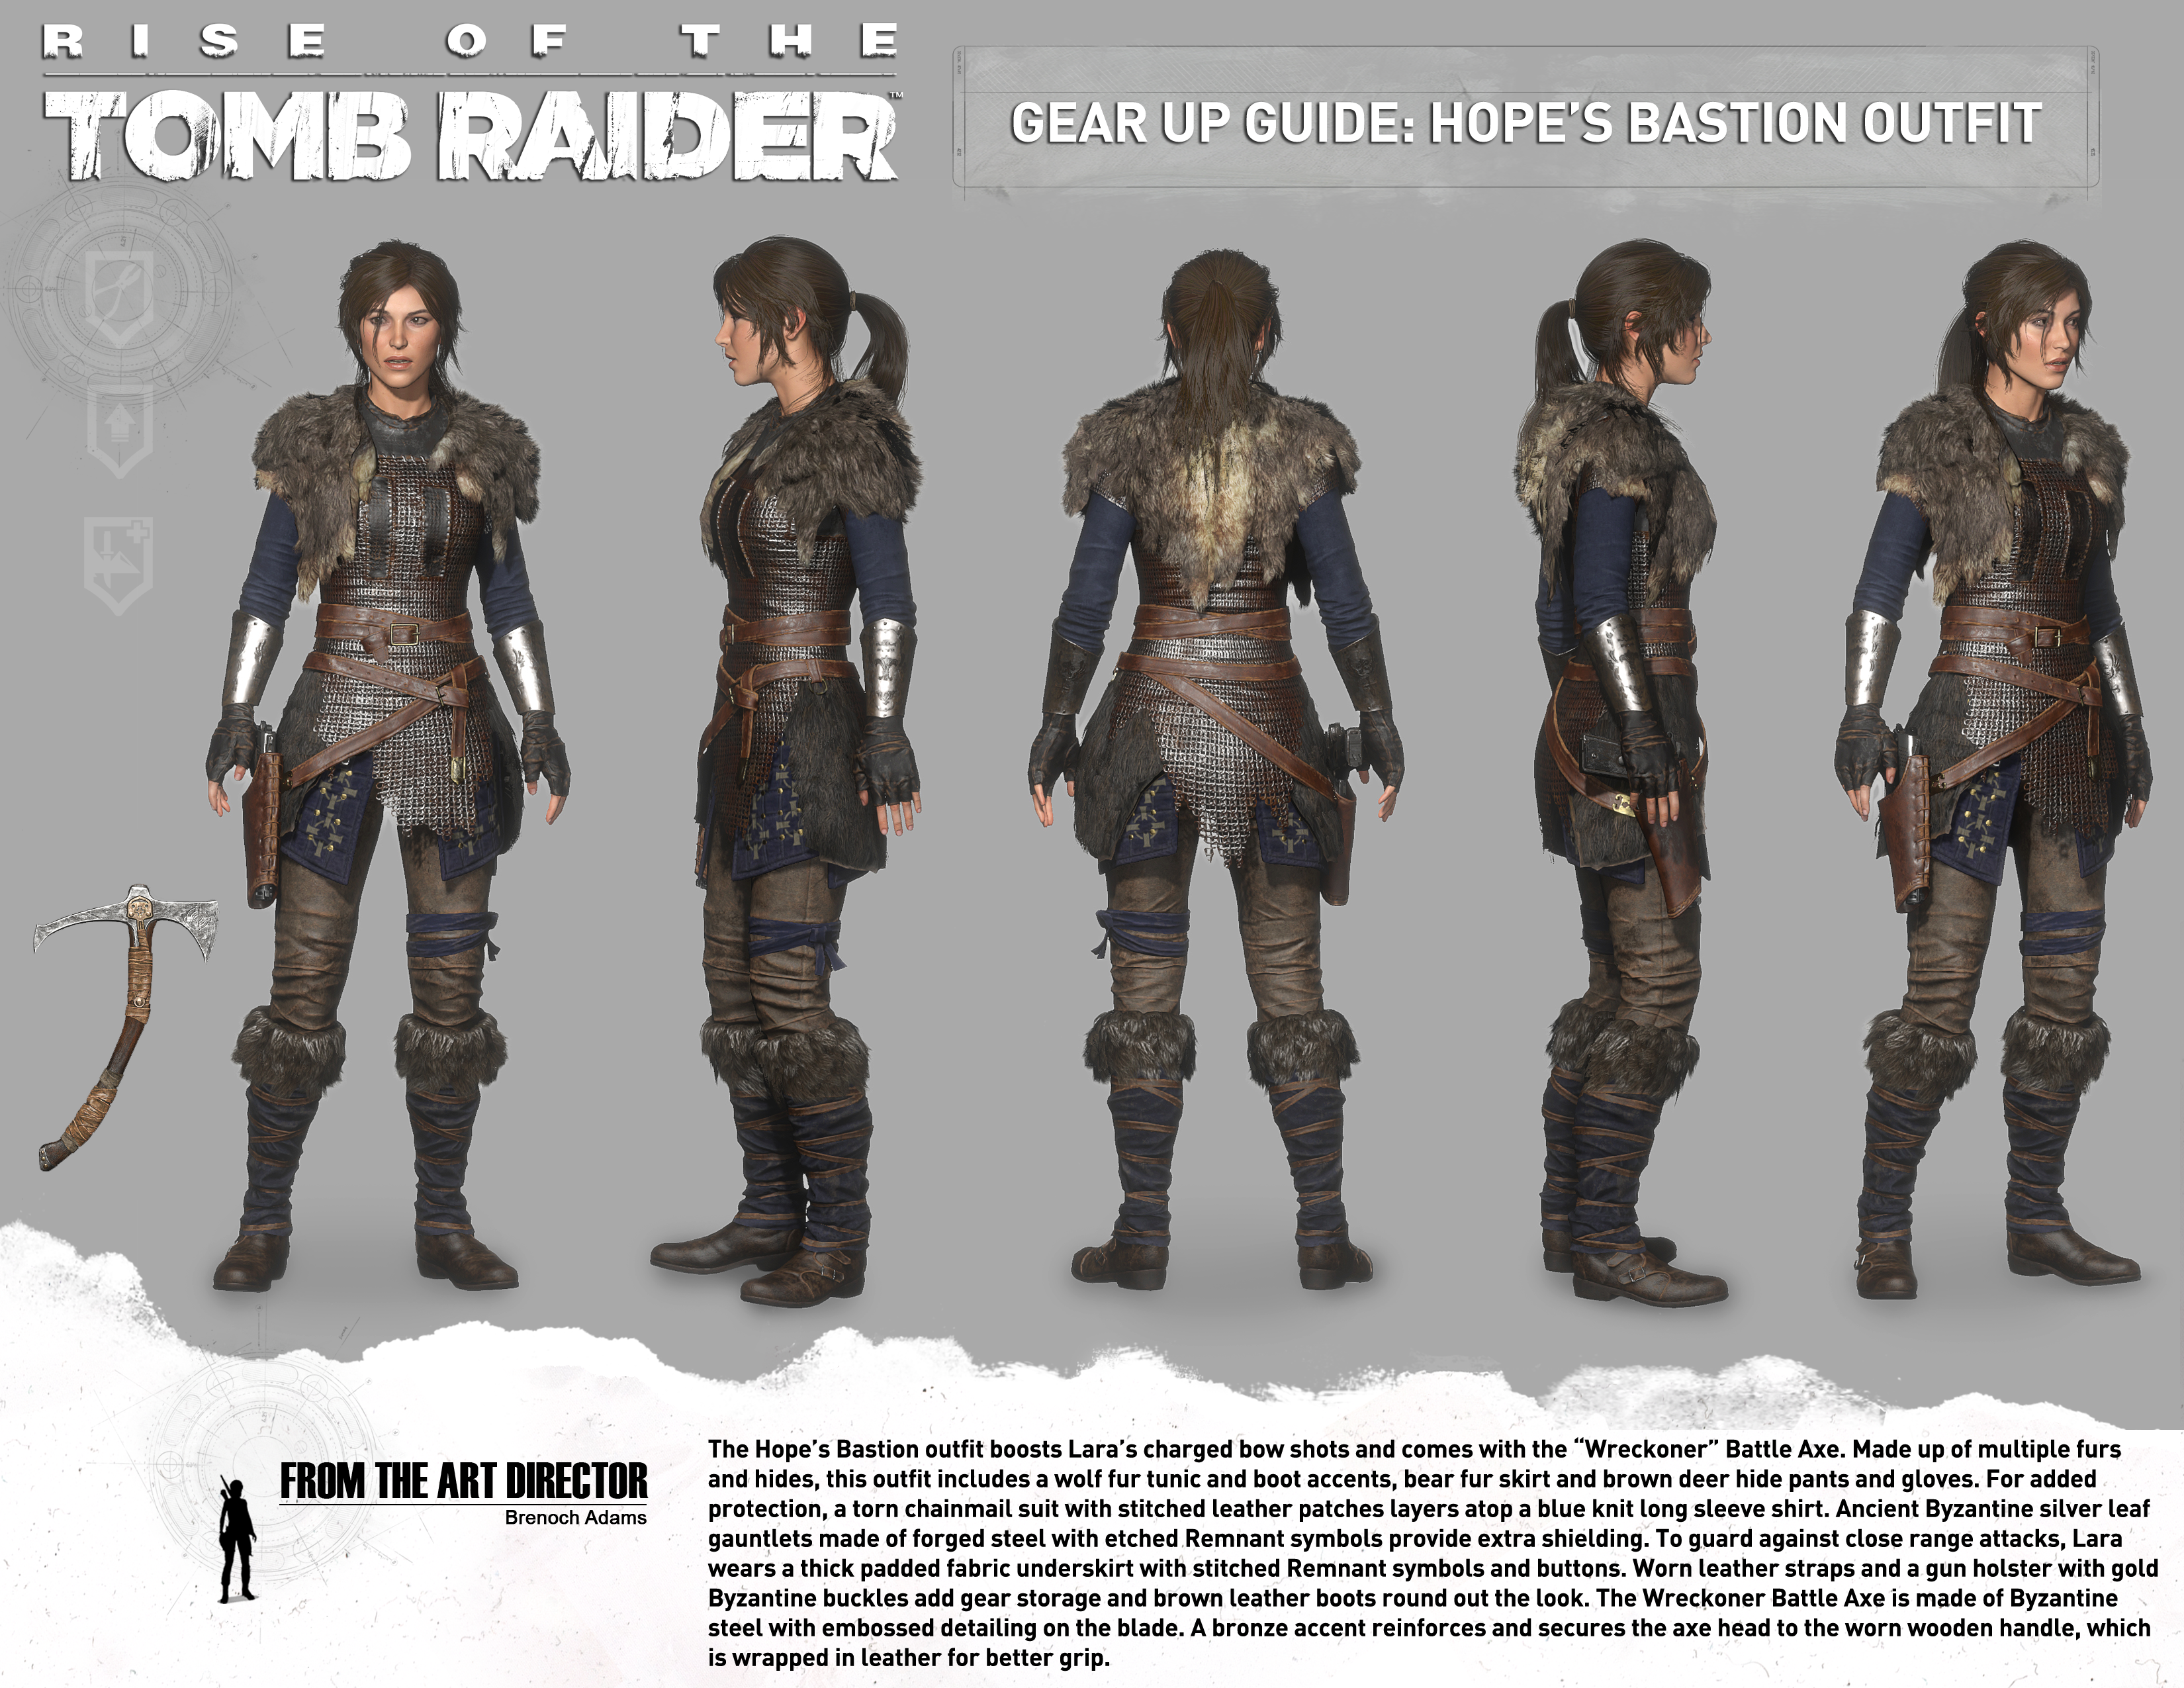 rise of the tomb raider ancient secrets